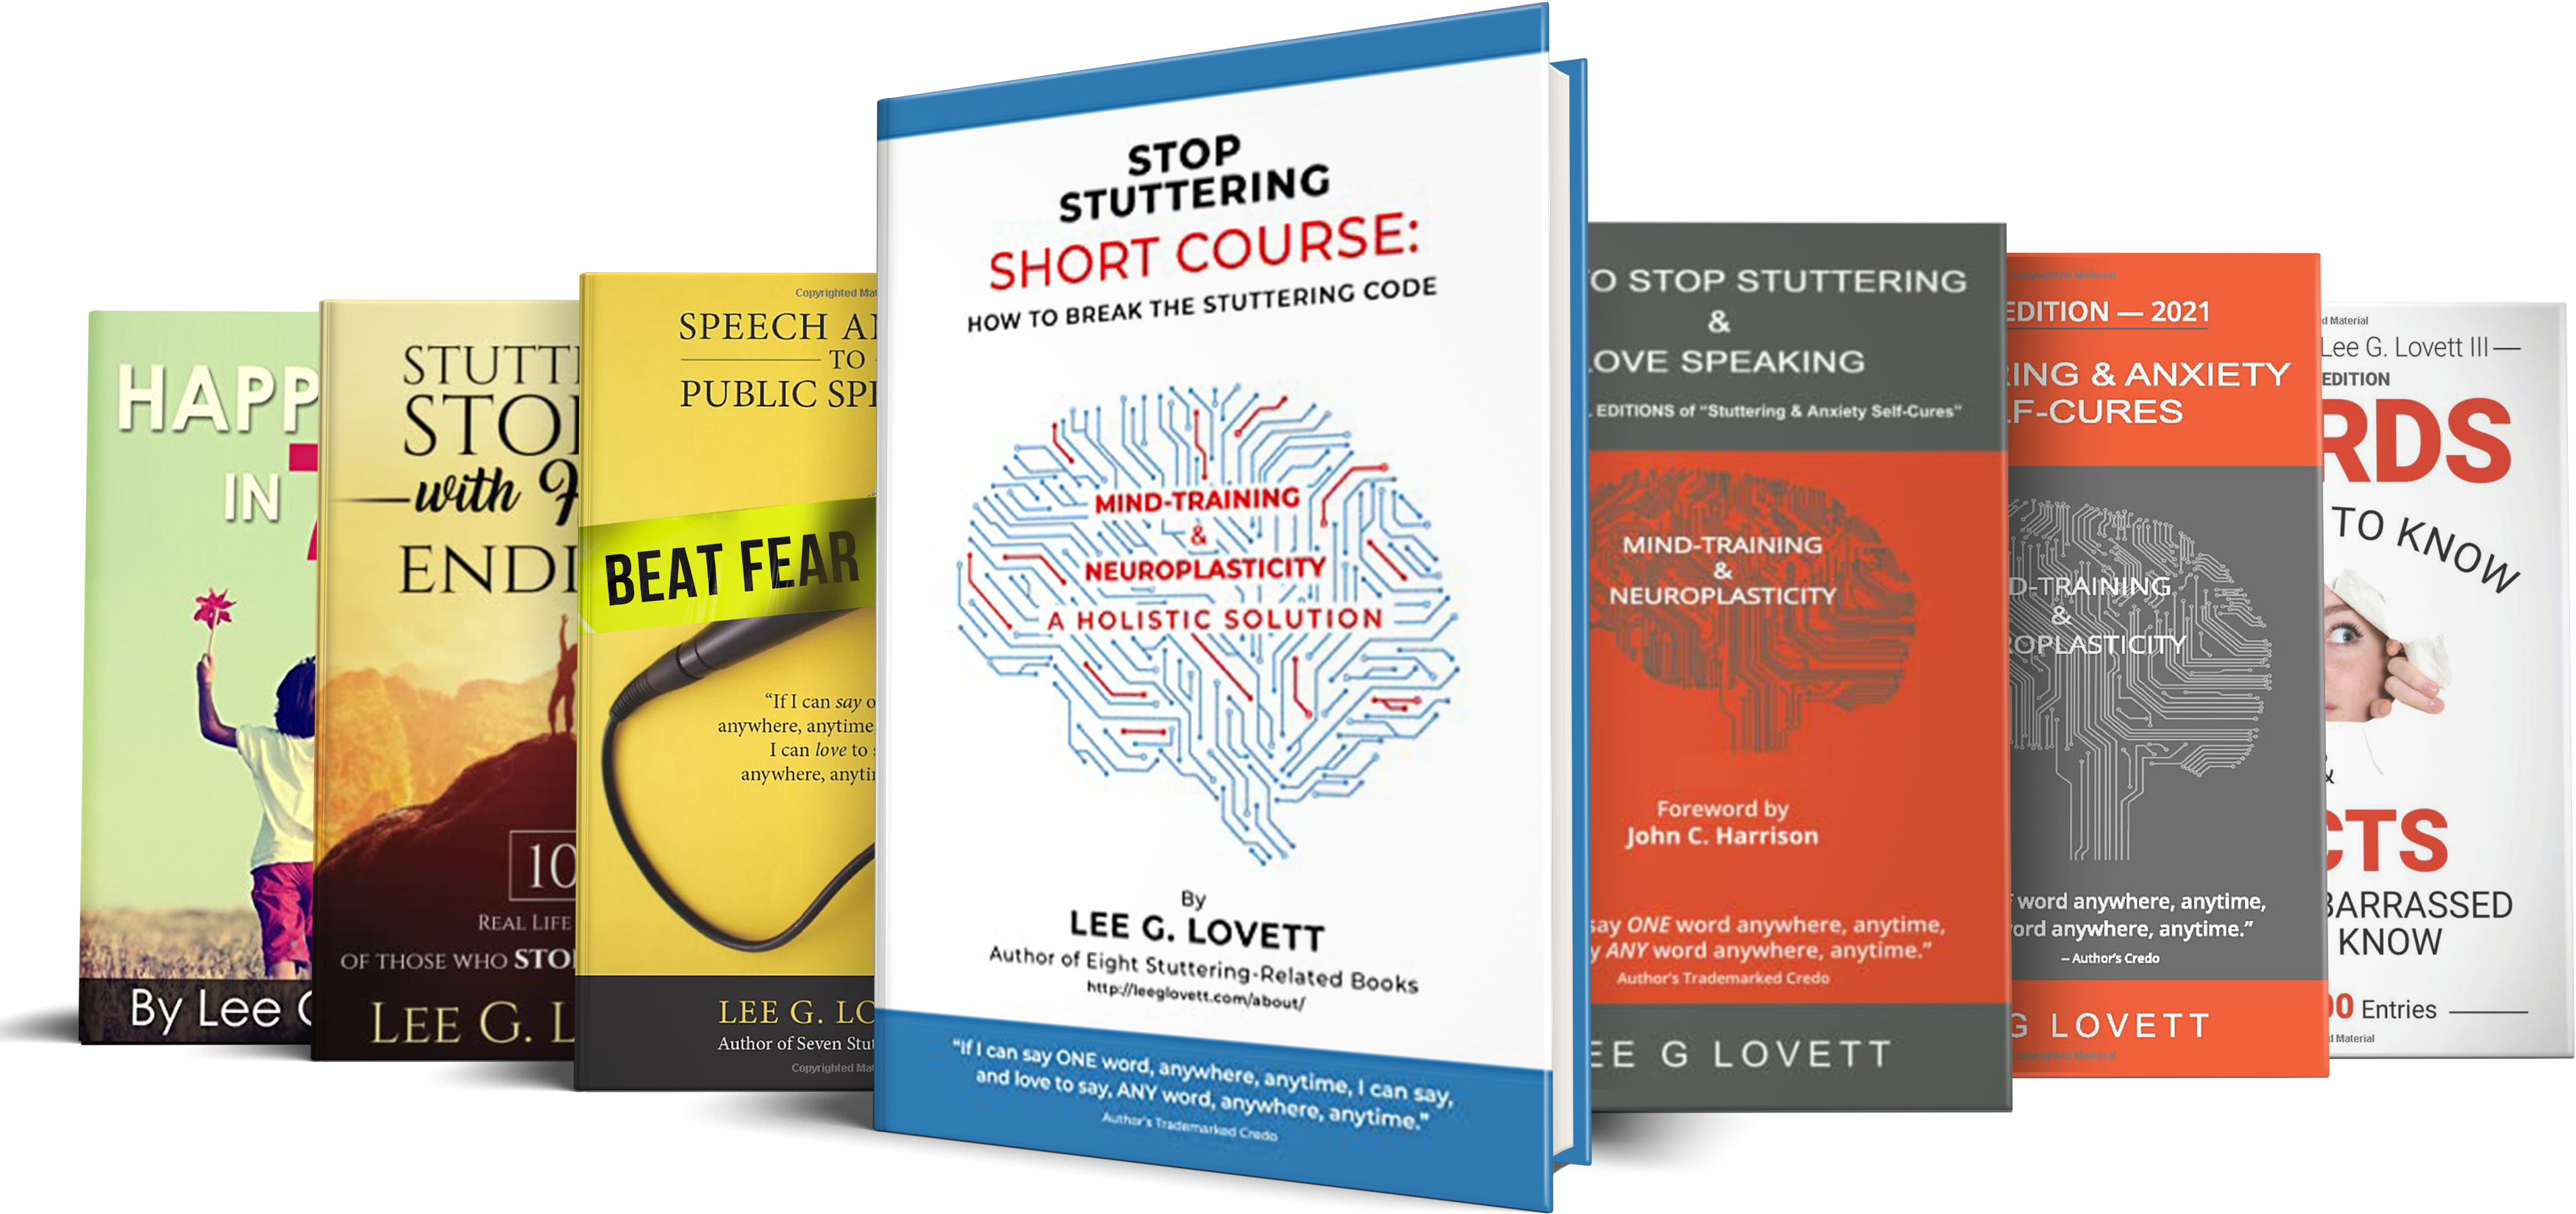 Stuttering and Speech Books to help you stop stuttering and love speaking